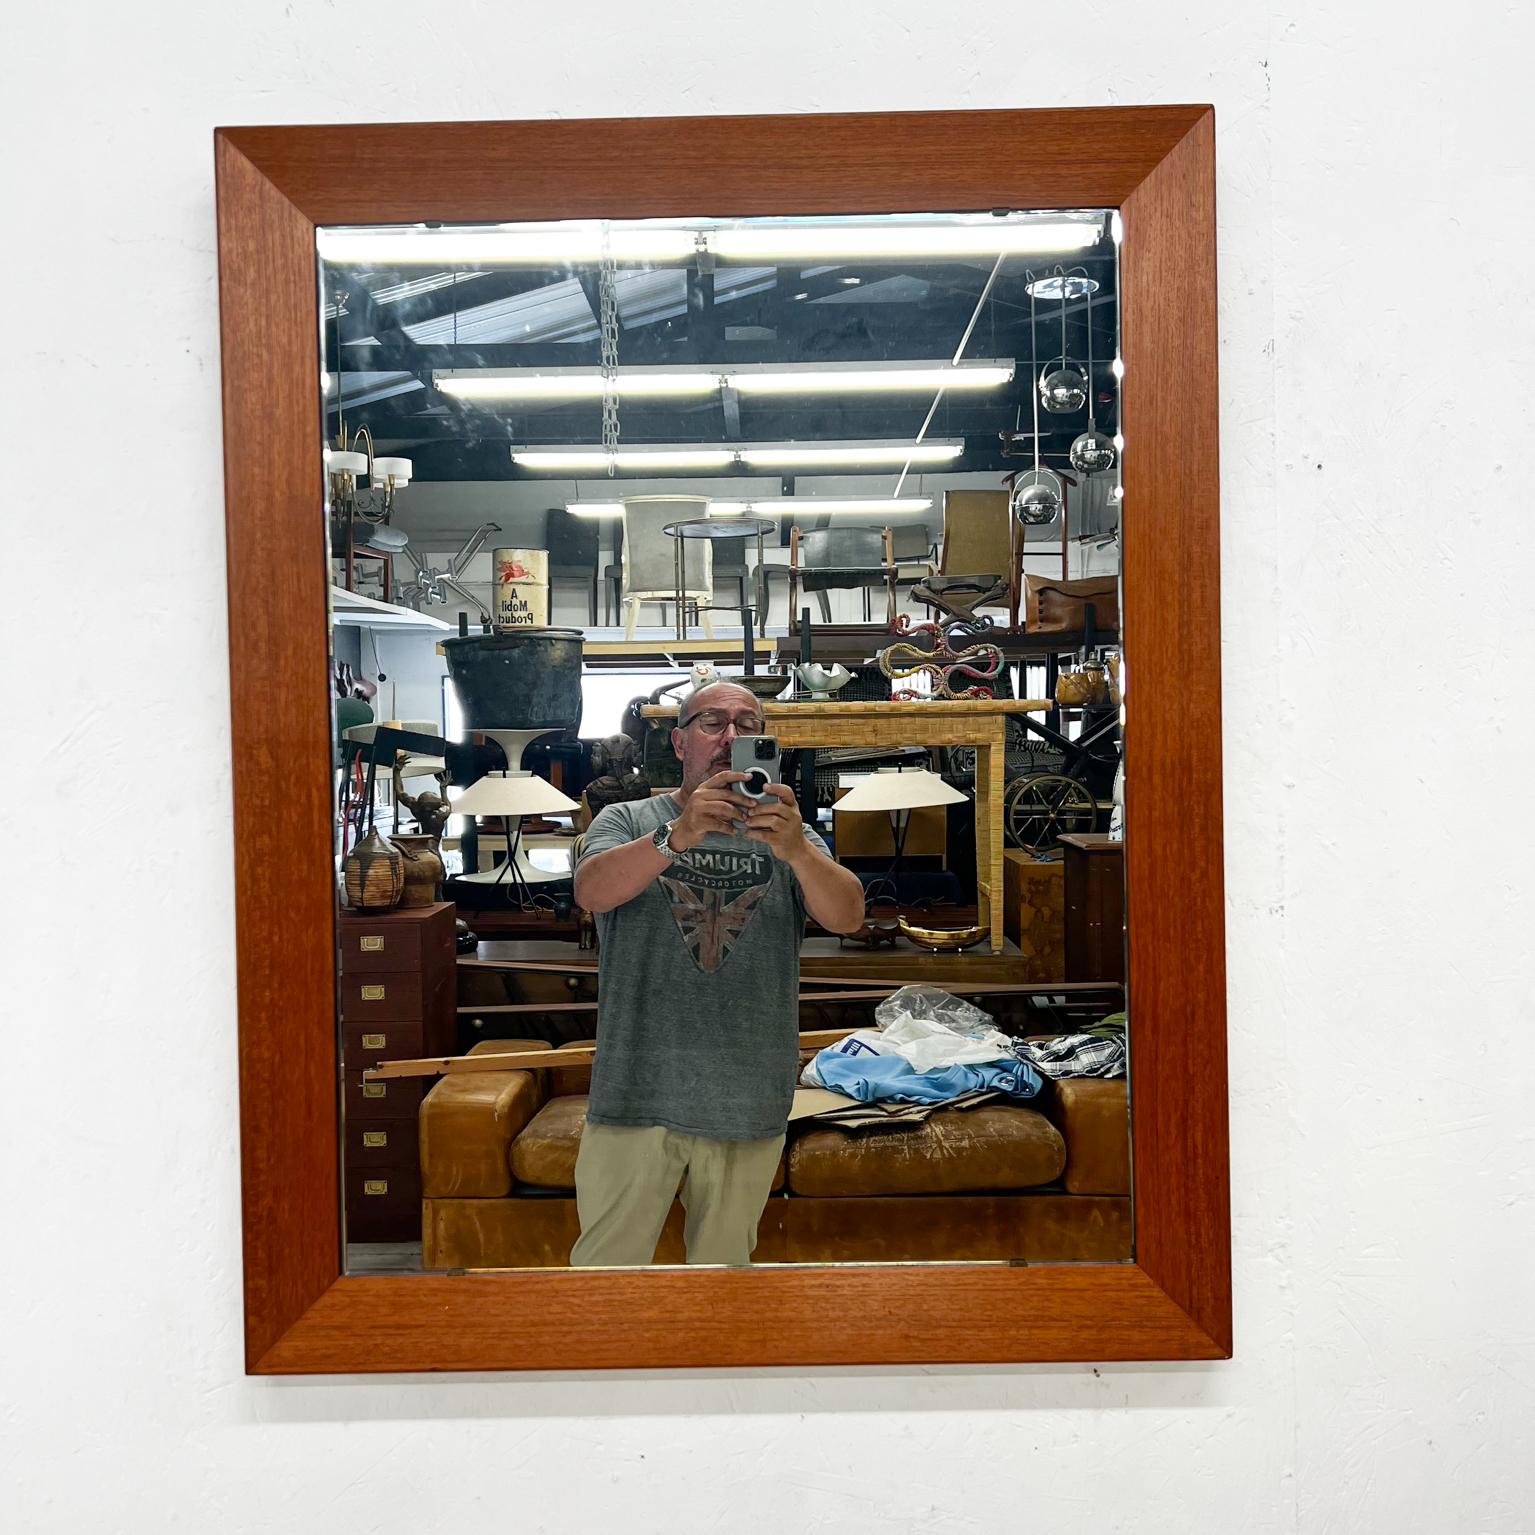 Modern Teak and Sapele Wall Mirror
Clean Modern Lines
41.5 tall x 32.88 w x 2 thick
Preowned original vintage condition.
Refer to images please.